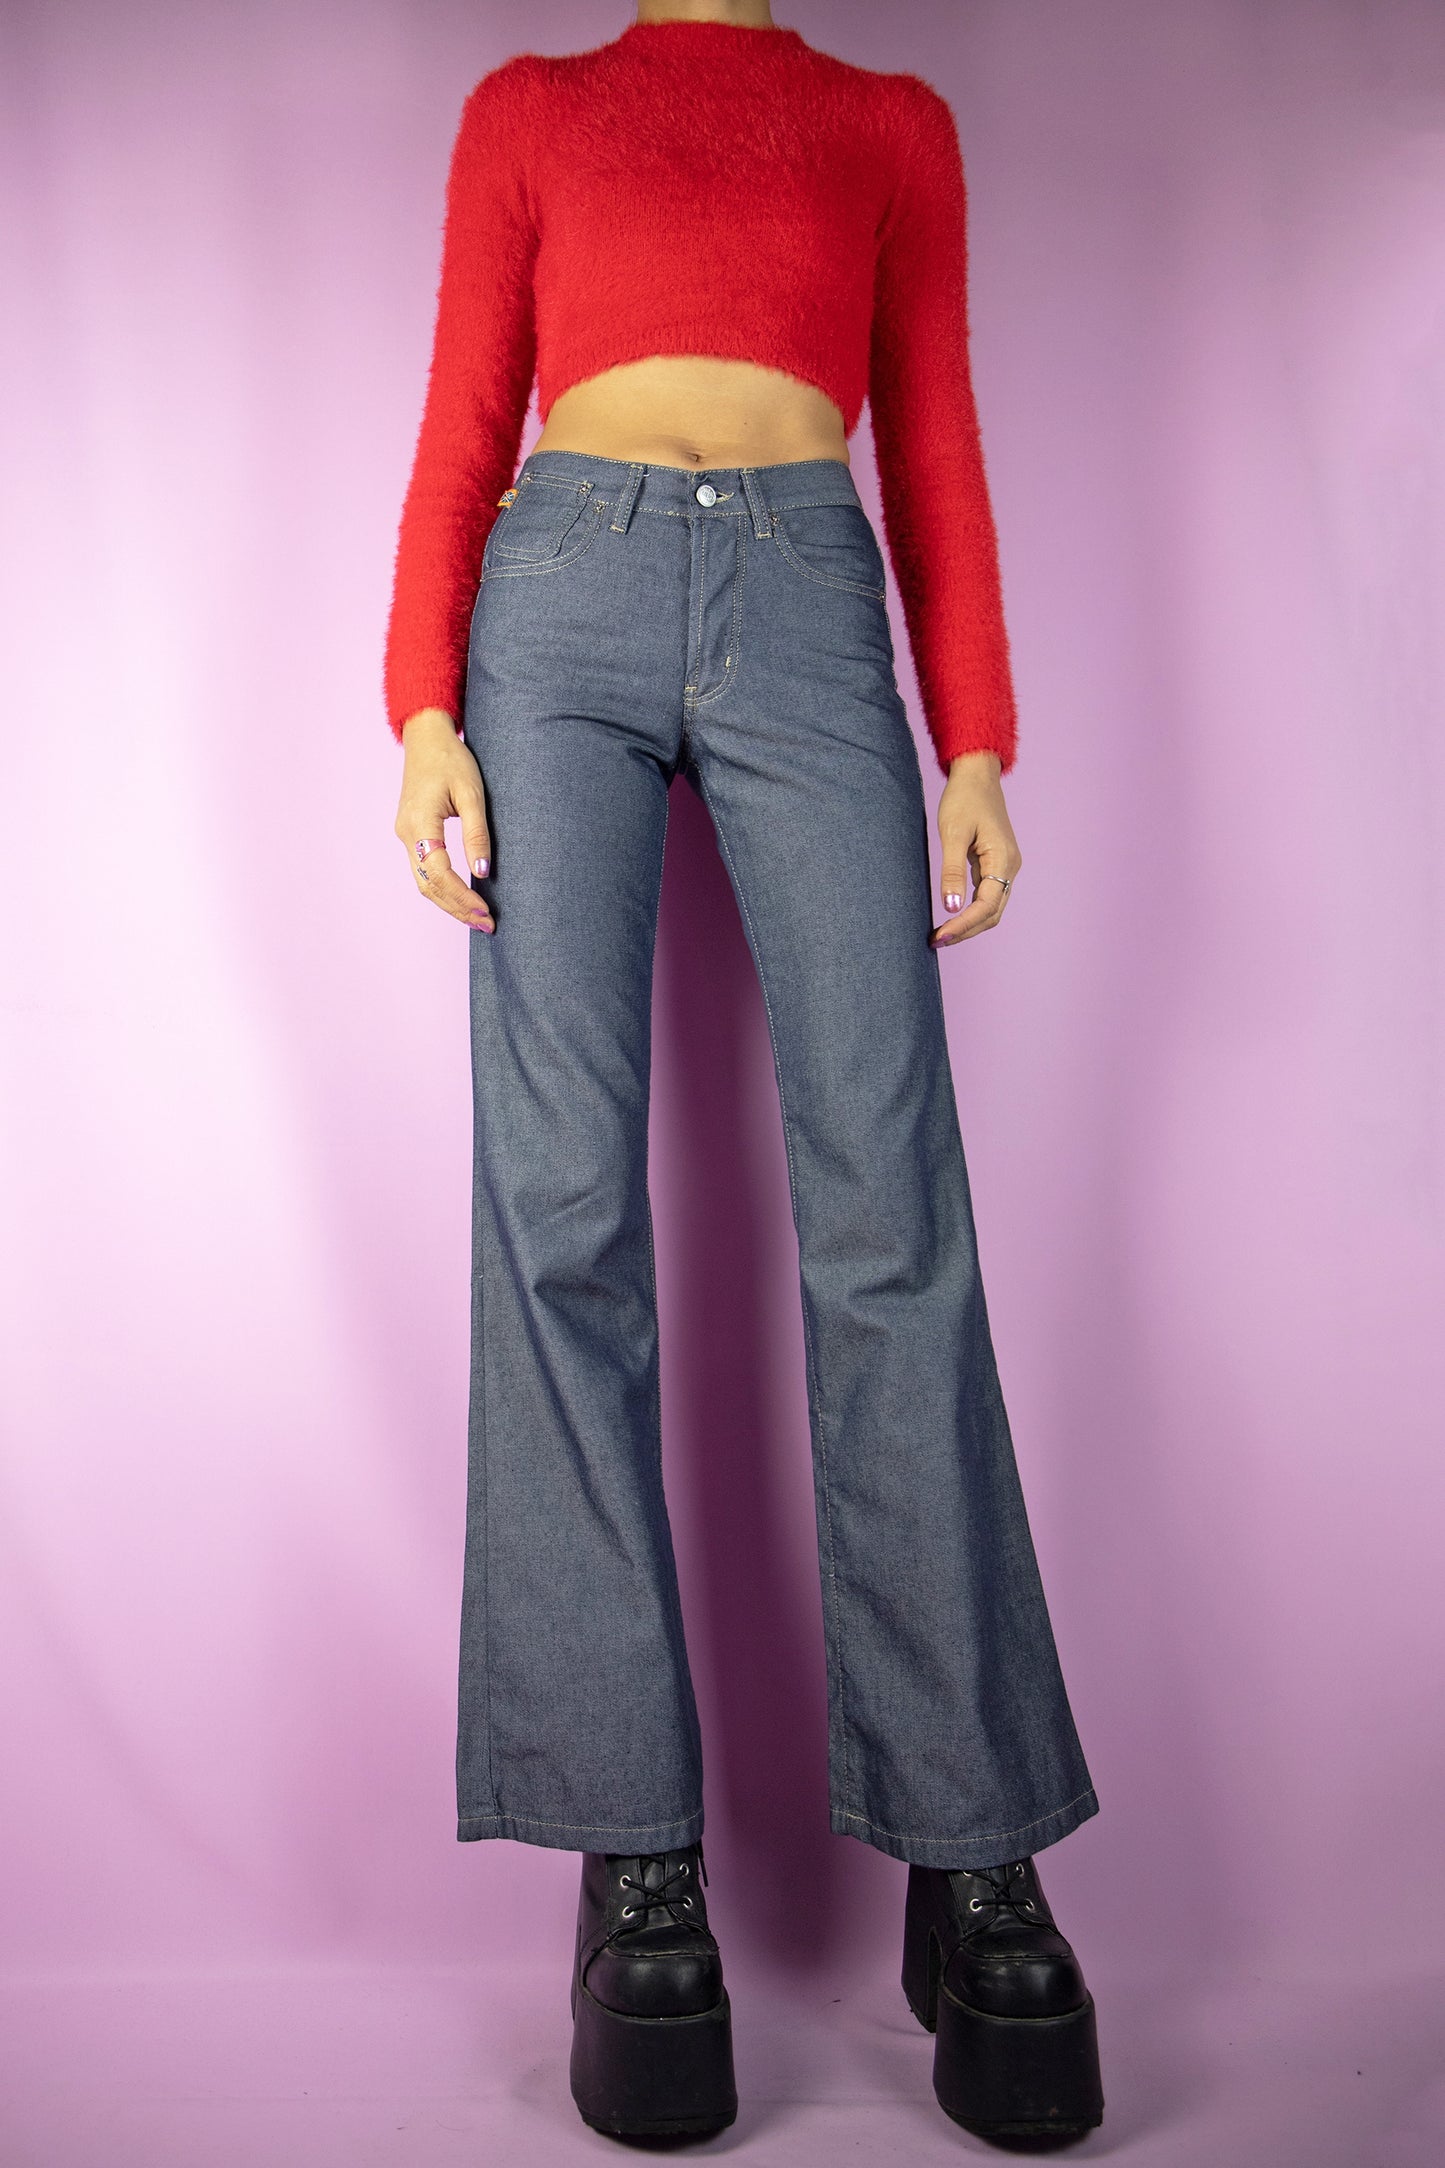 The Y2K Dark Mid Rise Flare Jeans are dark gray-blue mid-rise wide-leg flared pants with button closure and pockets. Super cute cyber grunge 2000s denim trousers.